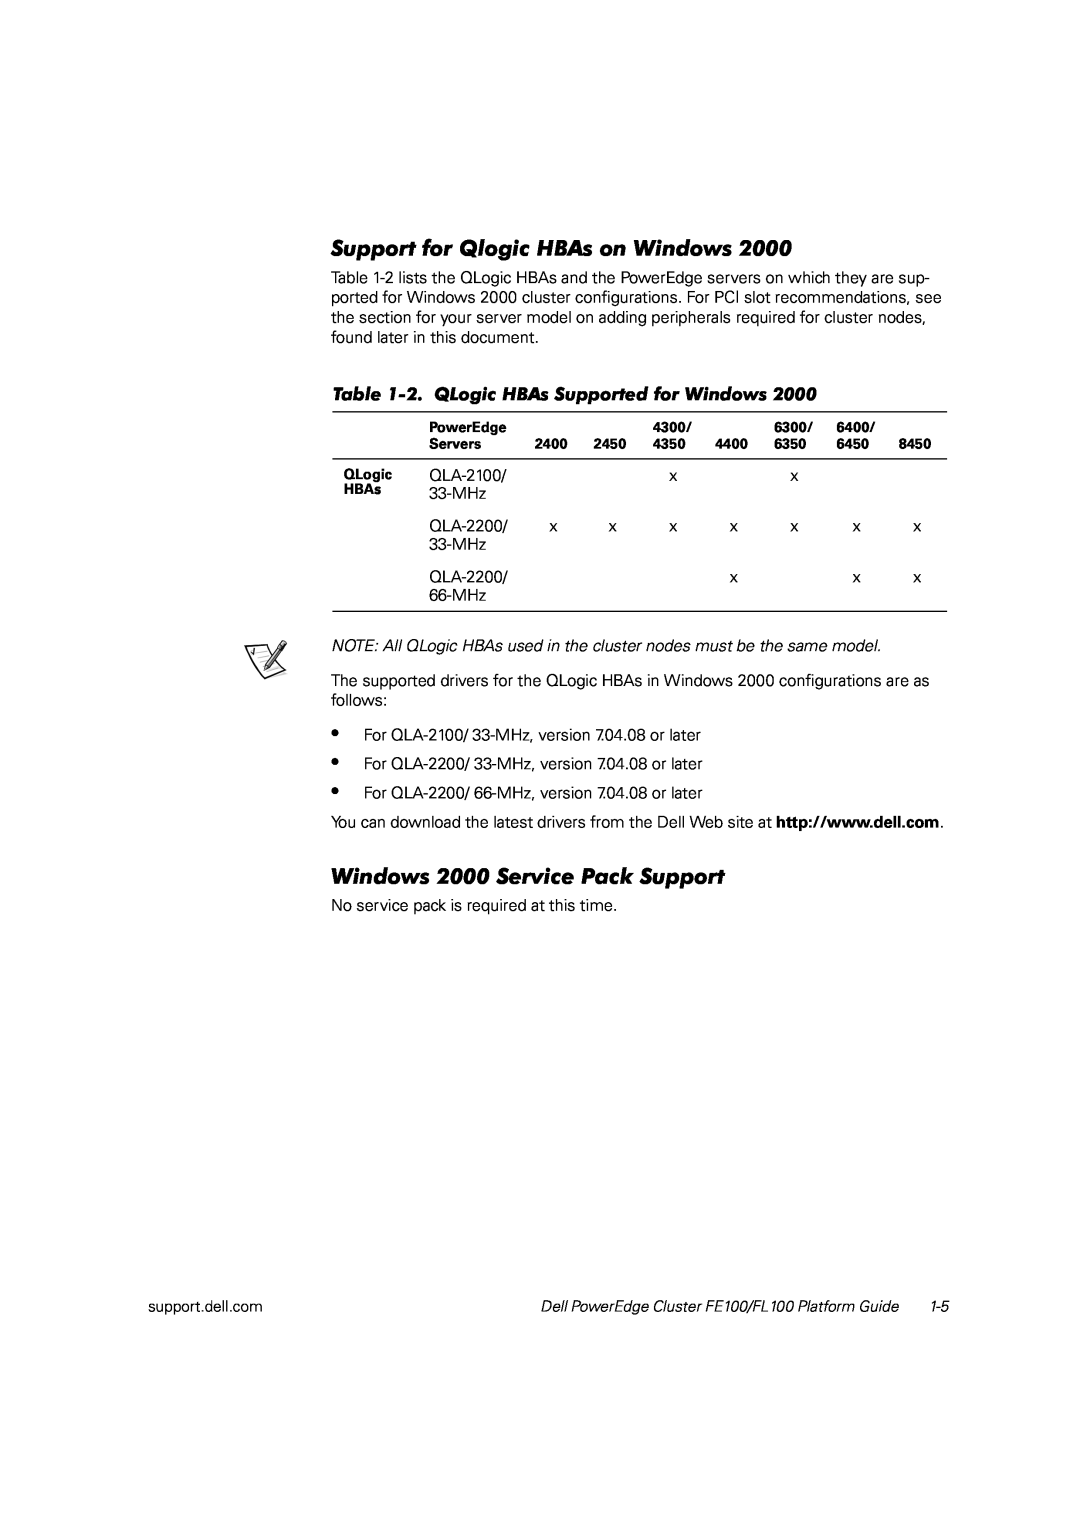 Dell FL100 Support for Qlogic HBAs on Windows, Windows 2000 Service Pack Support, 2.QLogic HBAs Supported for Windows 